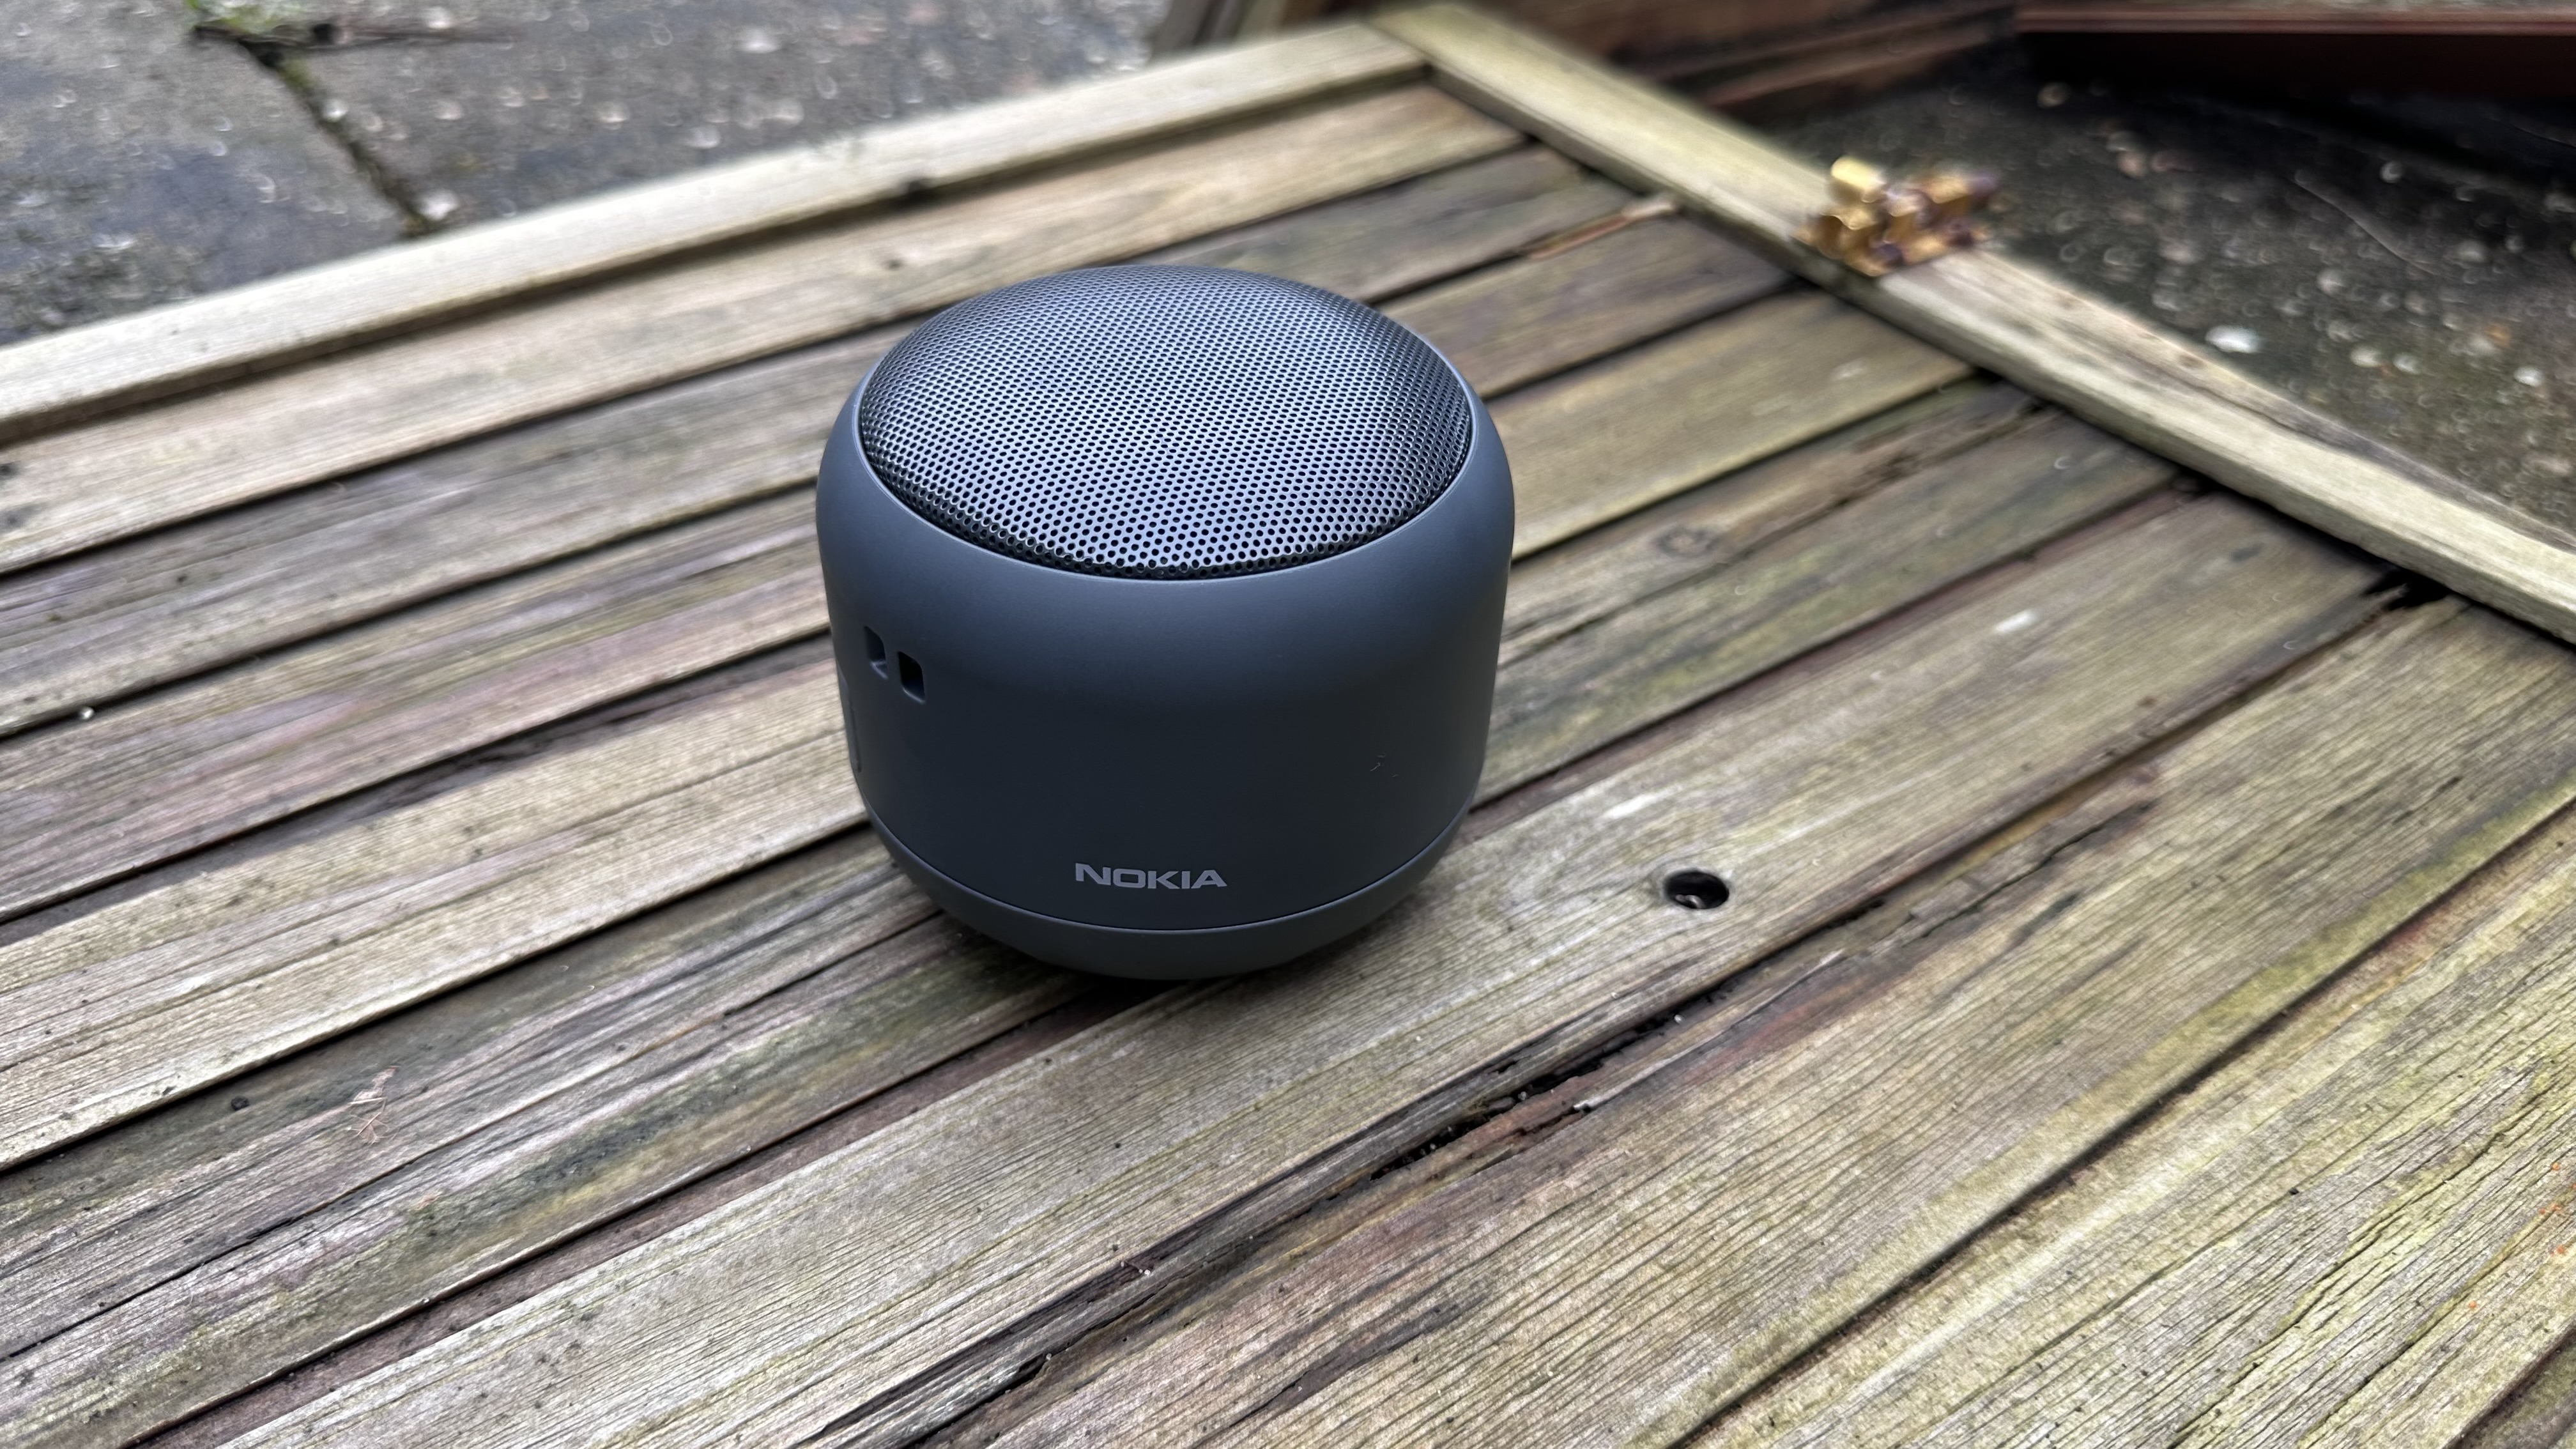 The Nokia Portable Wireless Speaker 2 on a wooden surface.